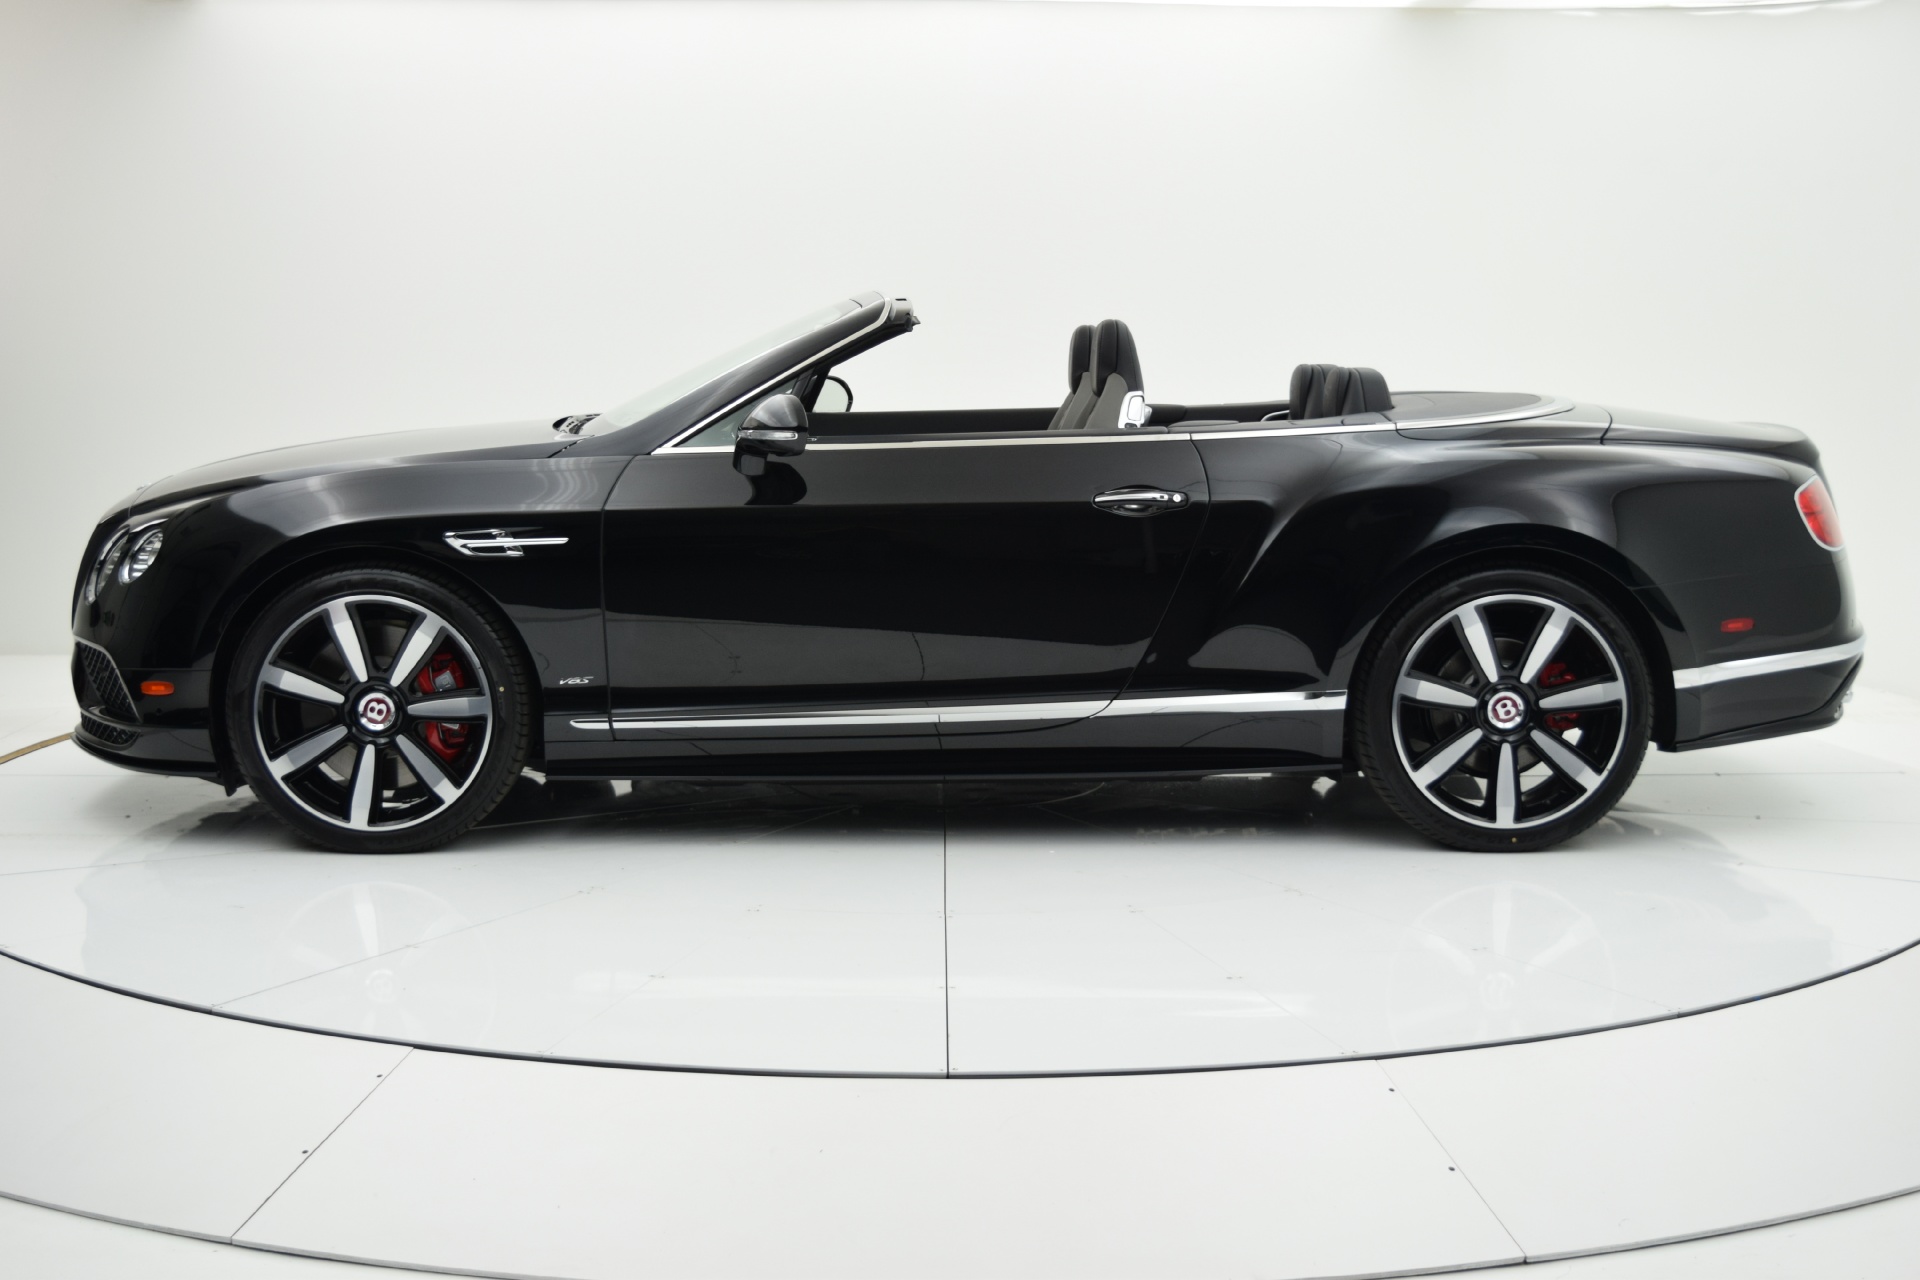 New 2016 Bentley Continental GT V8 S Convertible for sale Sold at F.C. Kerbeck Lamborghini Palmyra N.J. in Palmyra NJ 08065 2